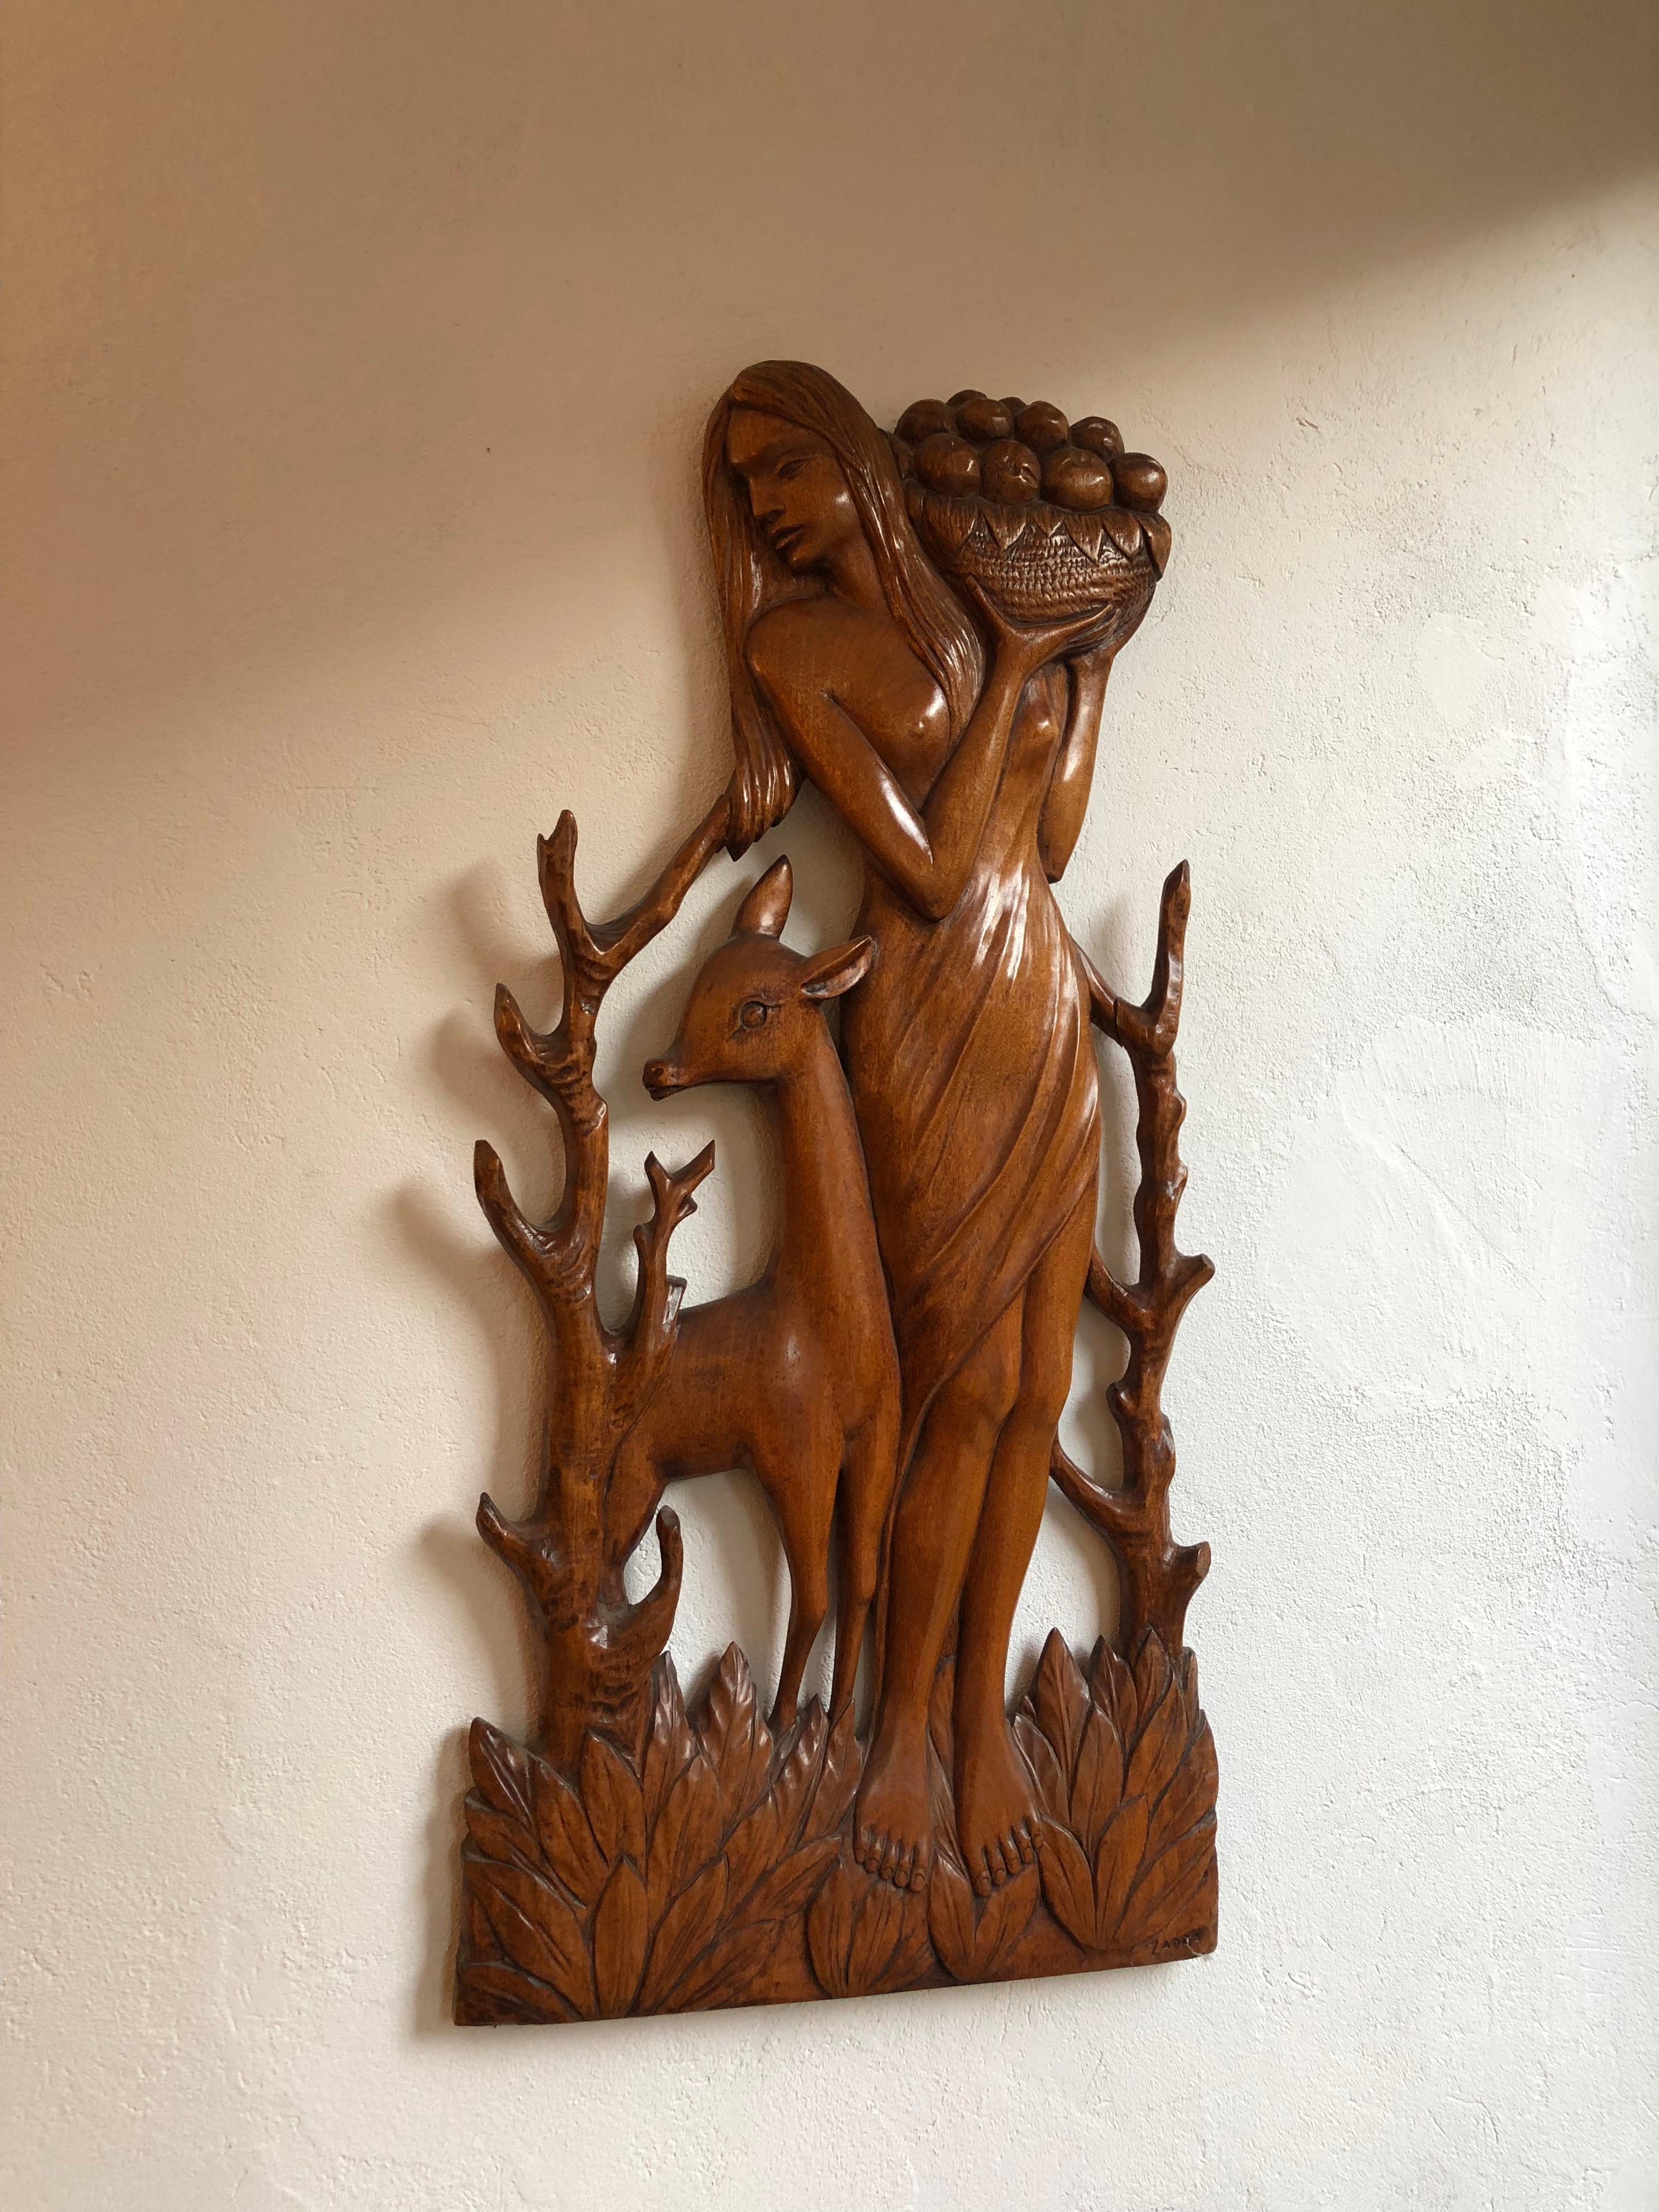 Amaizing Woman, 1940, France, Material, Wood, Sign, Zadra For Sale 9